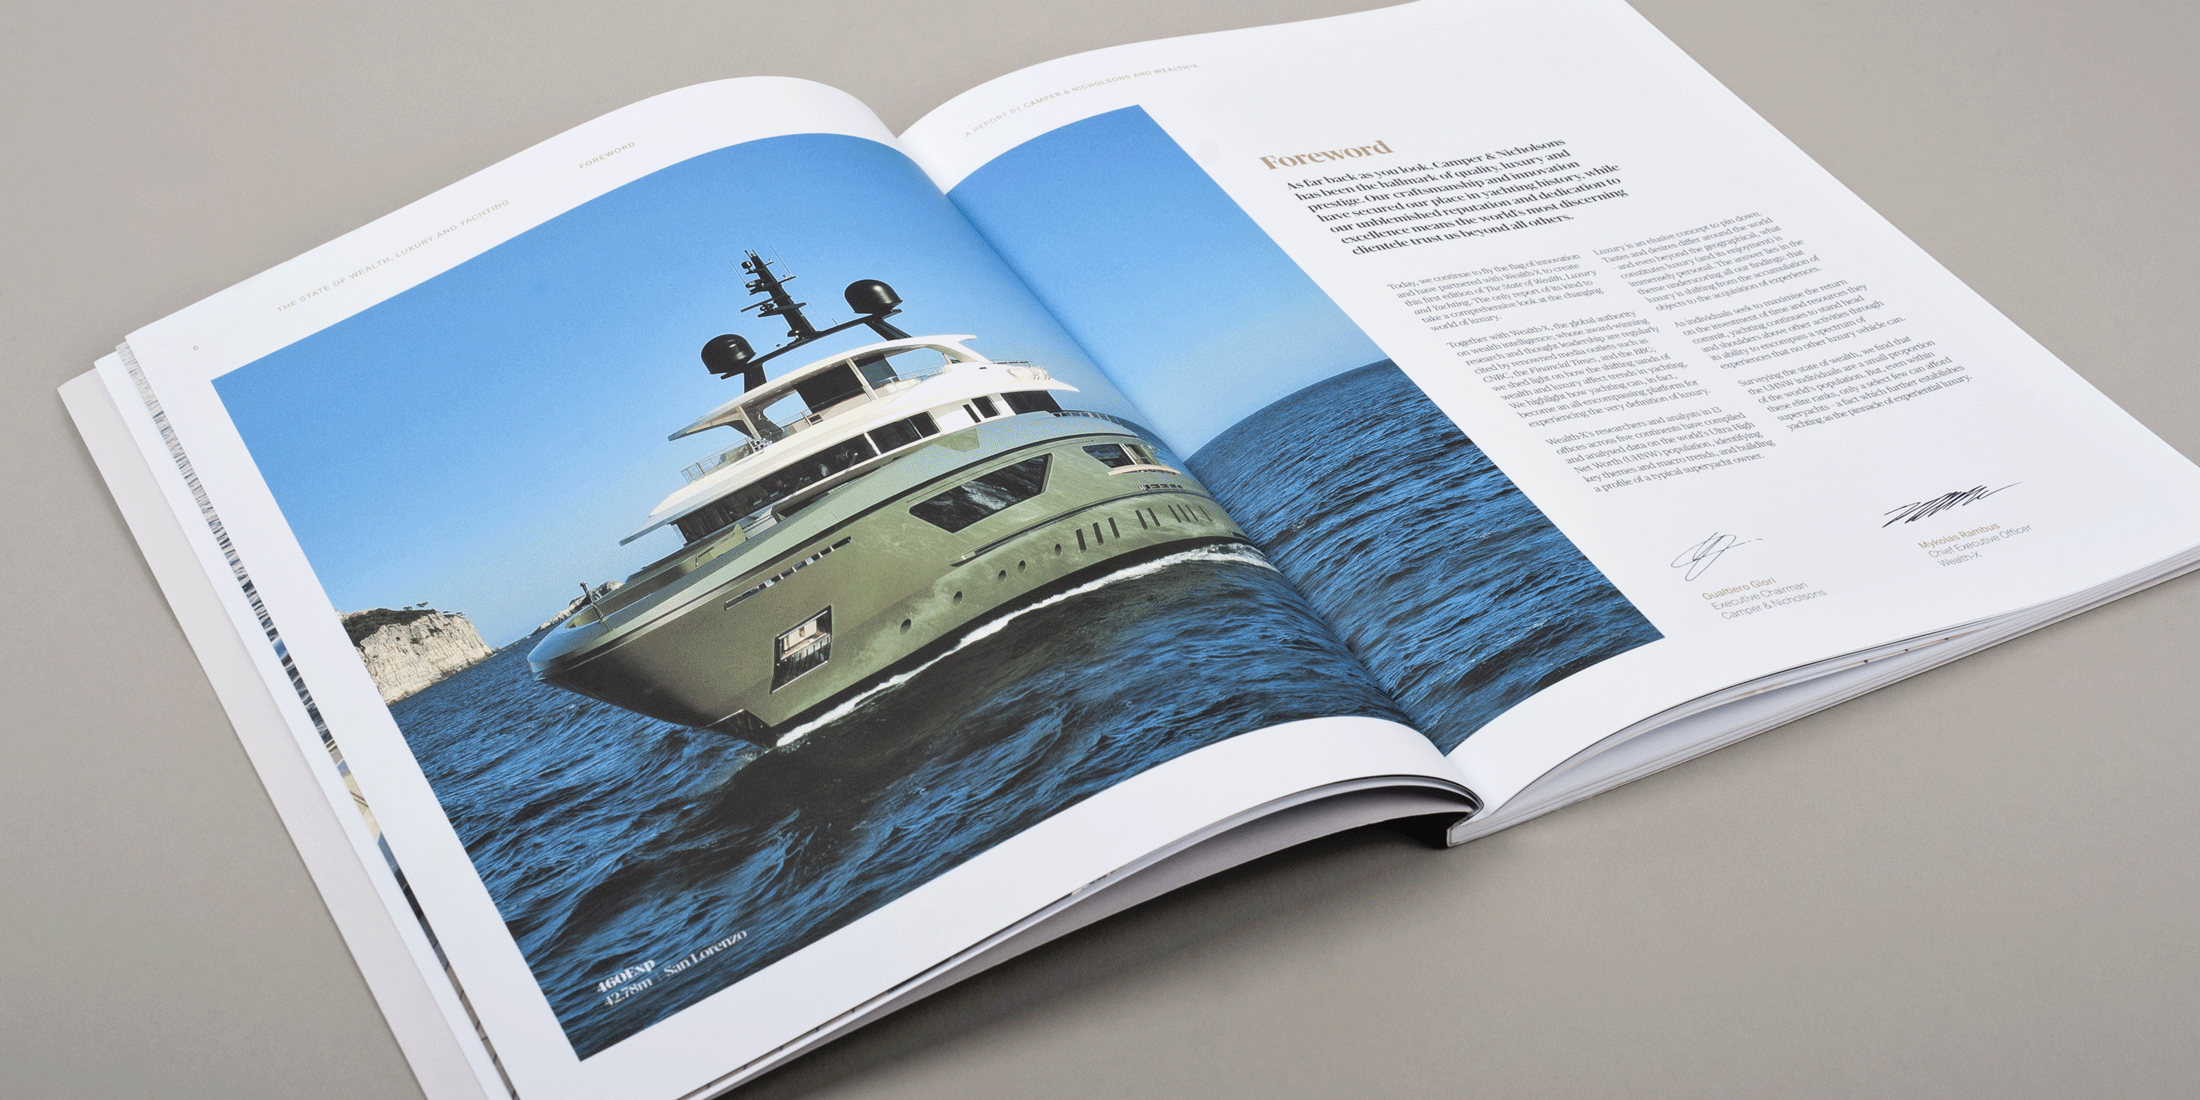 The State of Wealth, Luxury and Yachting